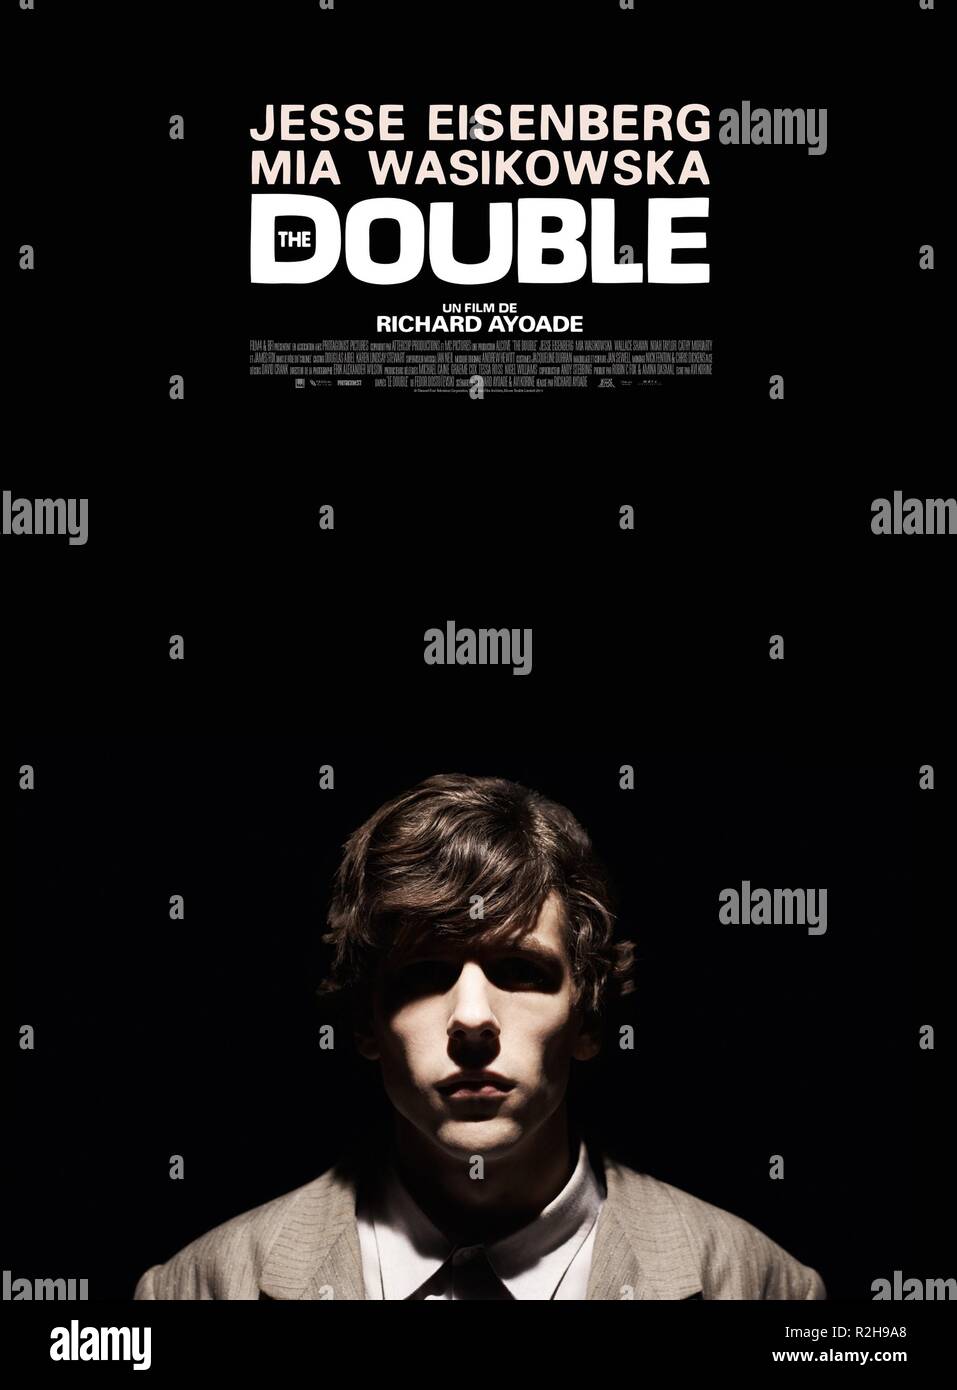 Jesse eisenberg movie poster fr hi-res stock photography and images - Alamy